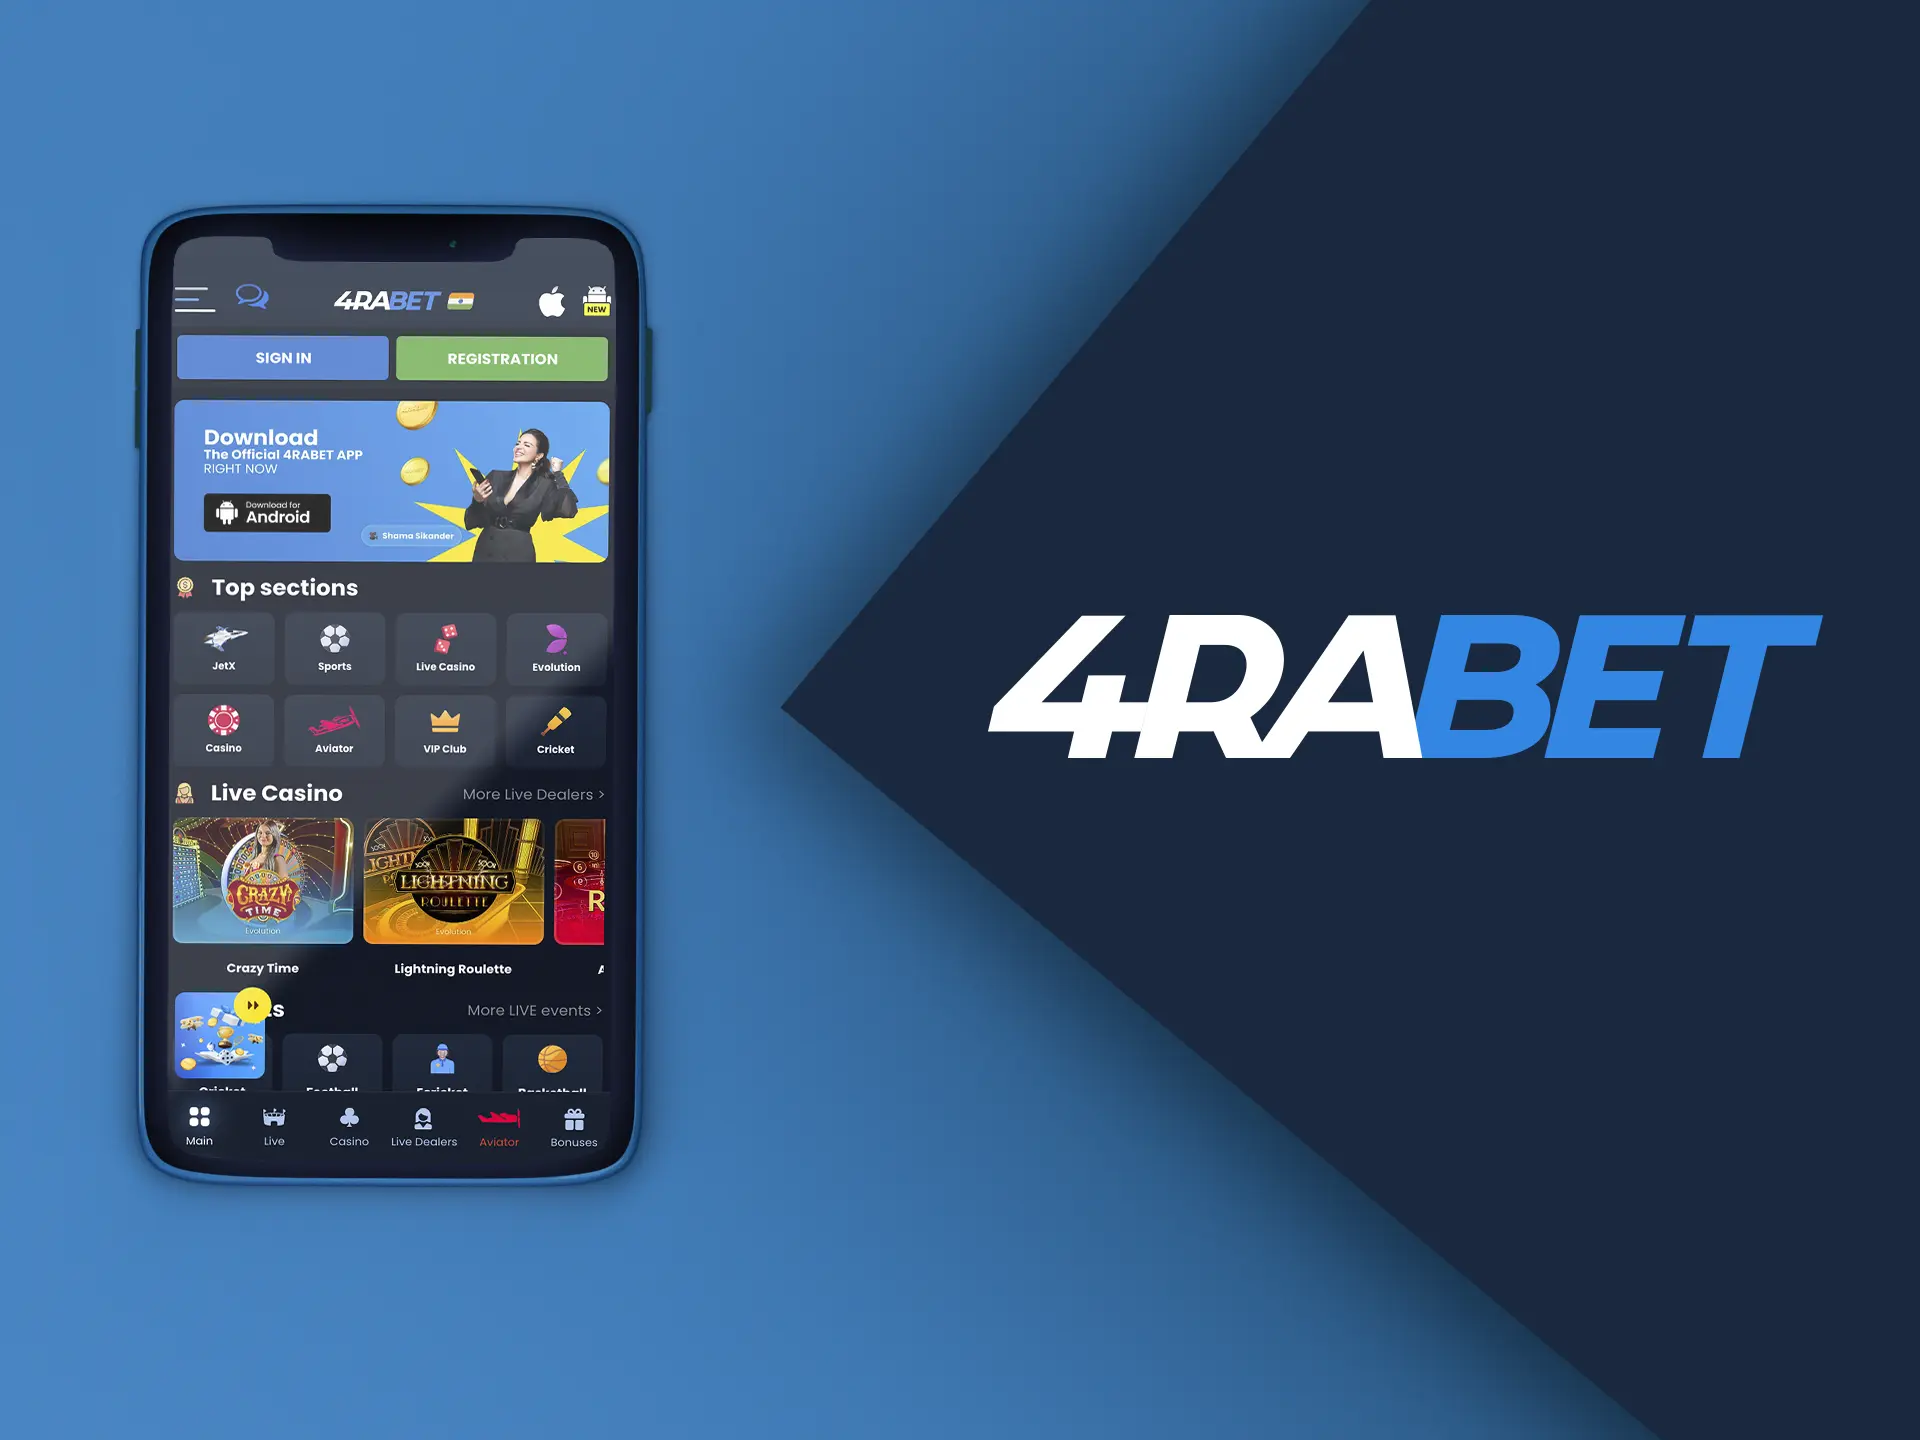 Learn the specifics of how to use the 4Rabet app.